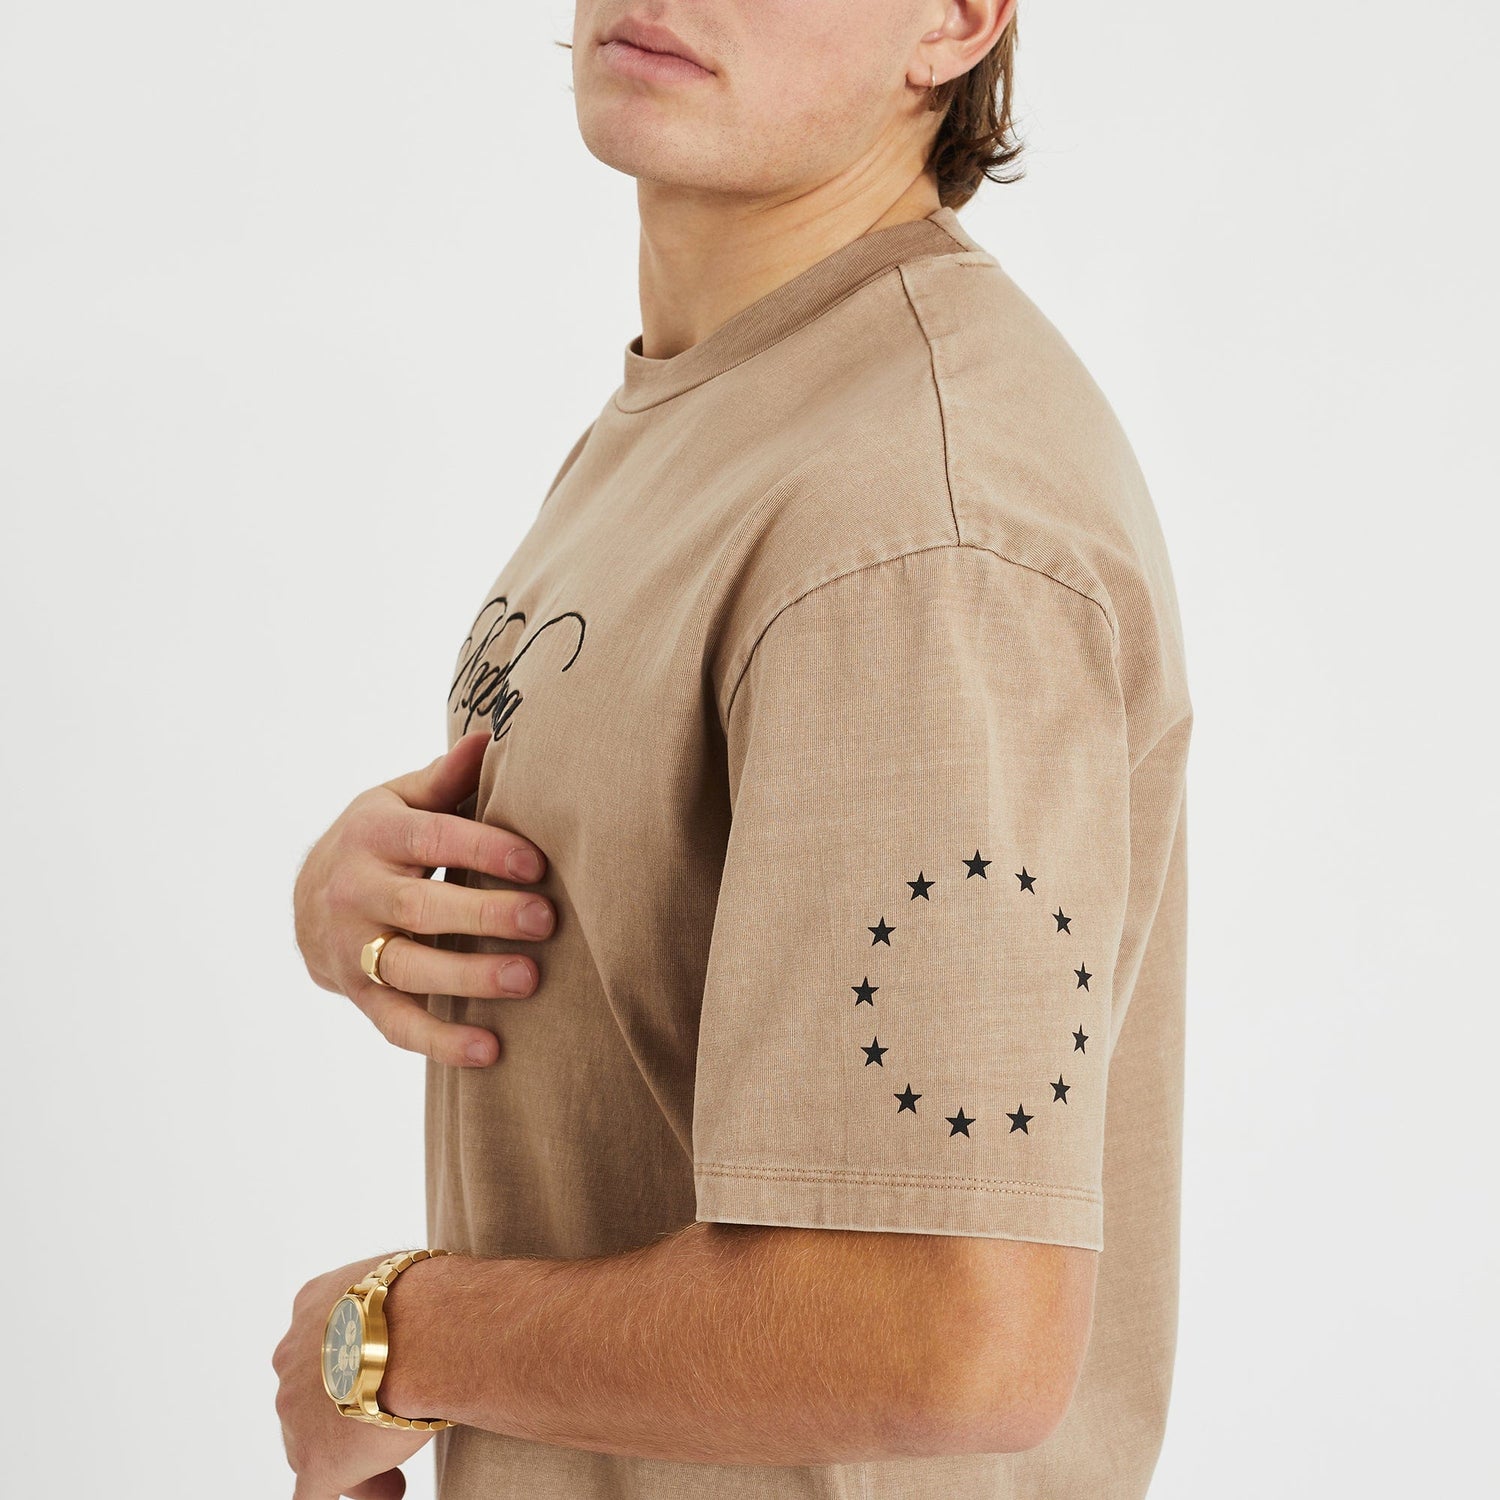 Lafayette Heavy Box Fit Scoop Tee Mineral Taupe